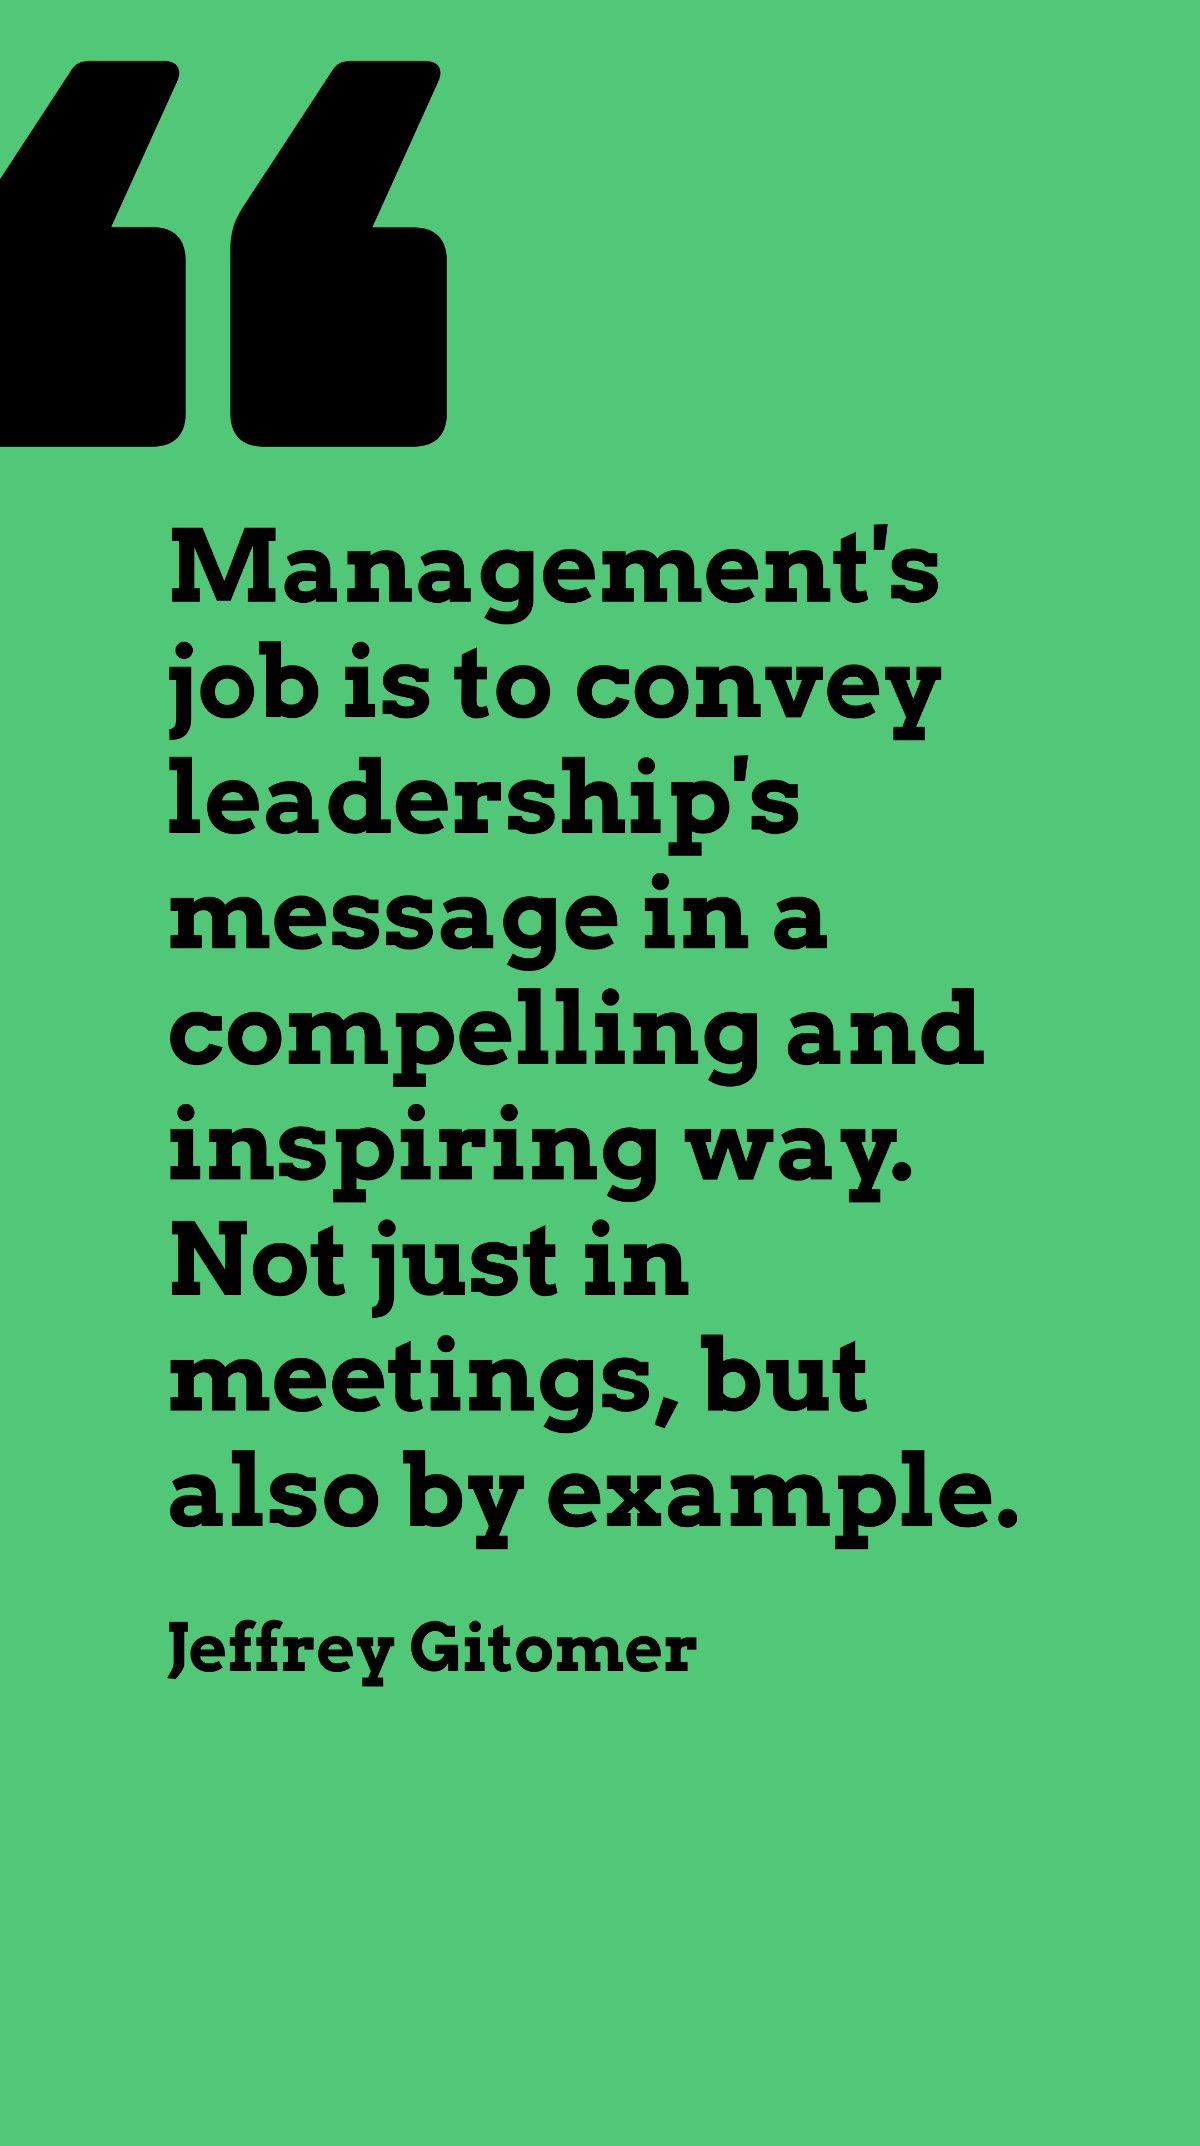 Jeffrey Gitomer - Management's job is to convey leadership's message in a compelling and inspiring way. Not just in meetings, but also by example. Template